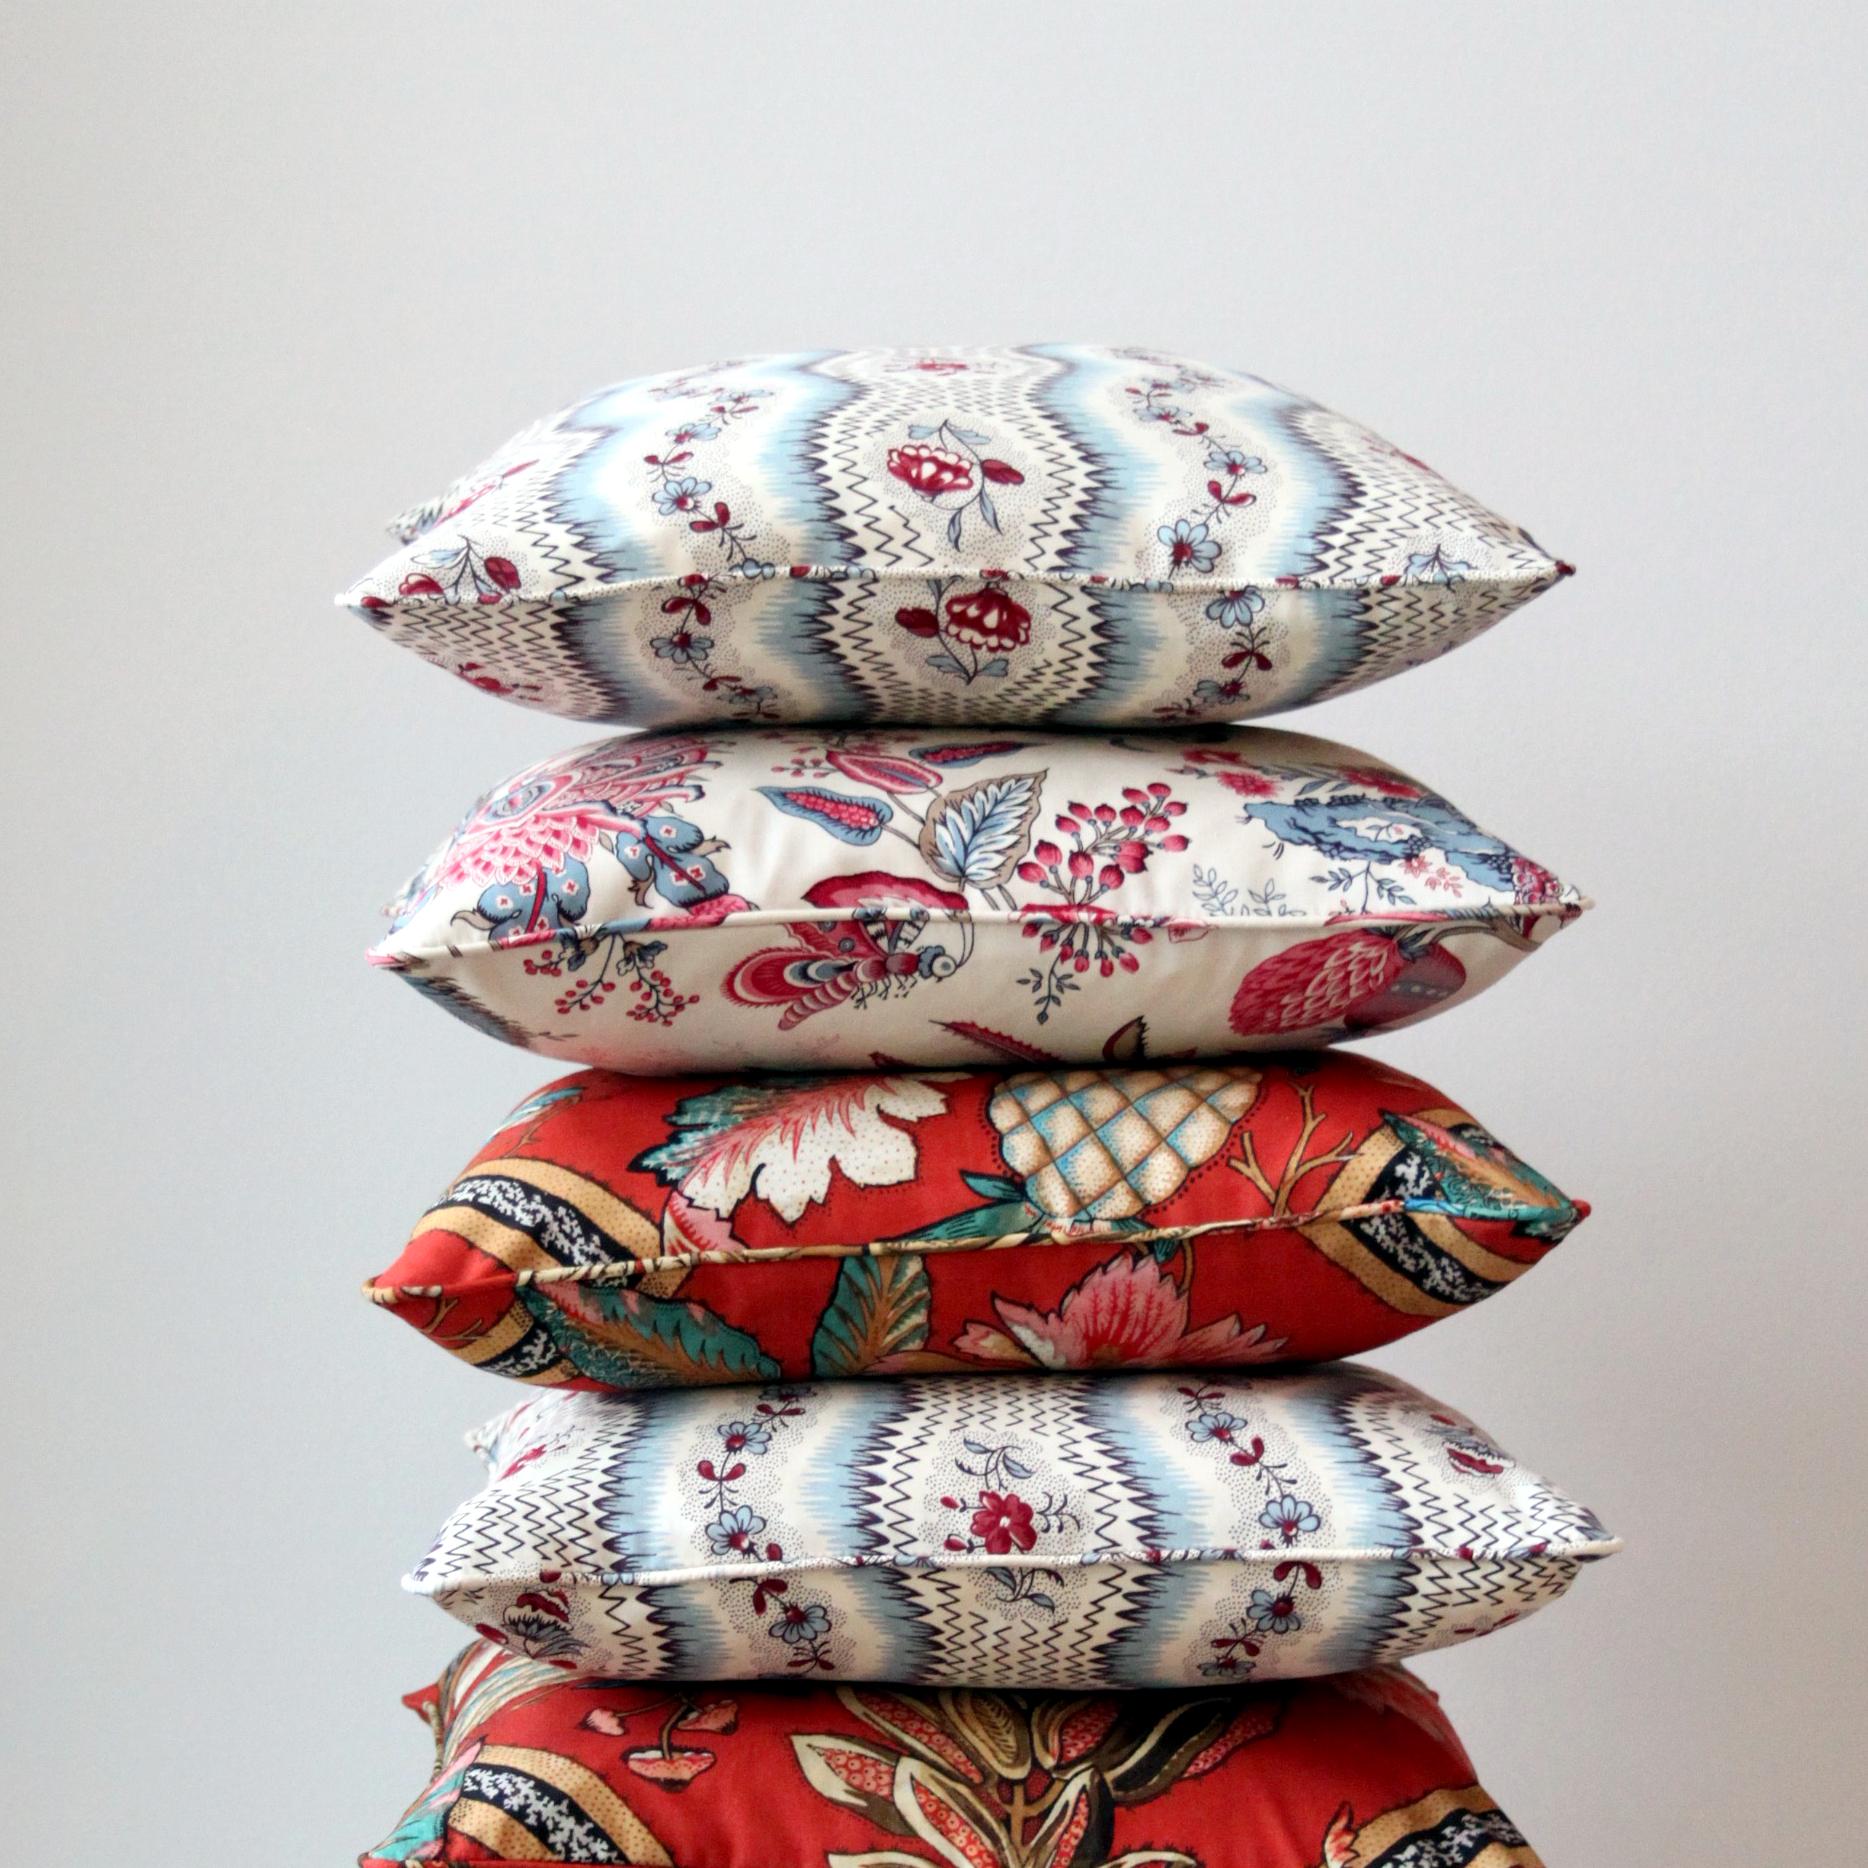 Special edition handcrafted pillows in beautiful fabric by The House of Pierre Frey - Manach and Braquenié collections. 

The pillows are with piping and fitted with hidden zipper. 

Measures: 40 x 40 cm. 

A poetic attribution to any